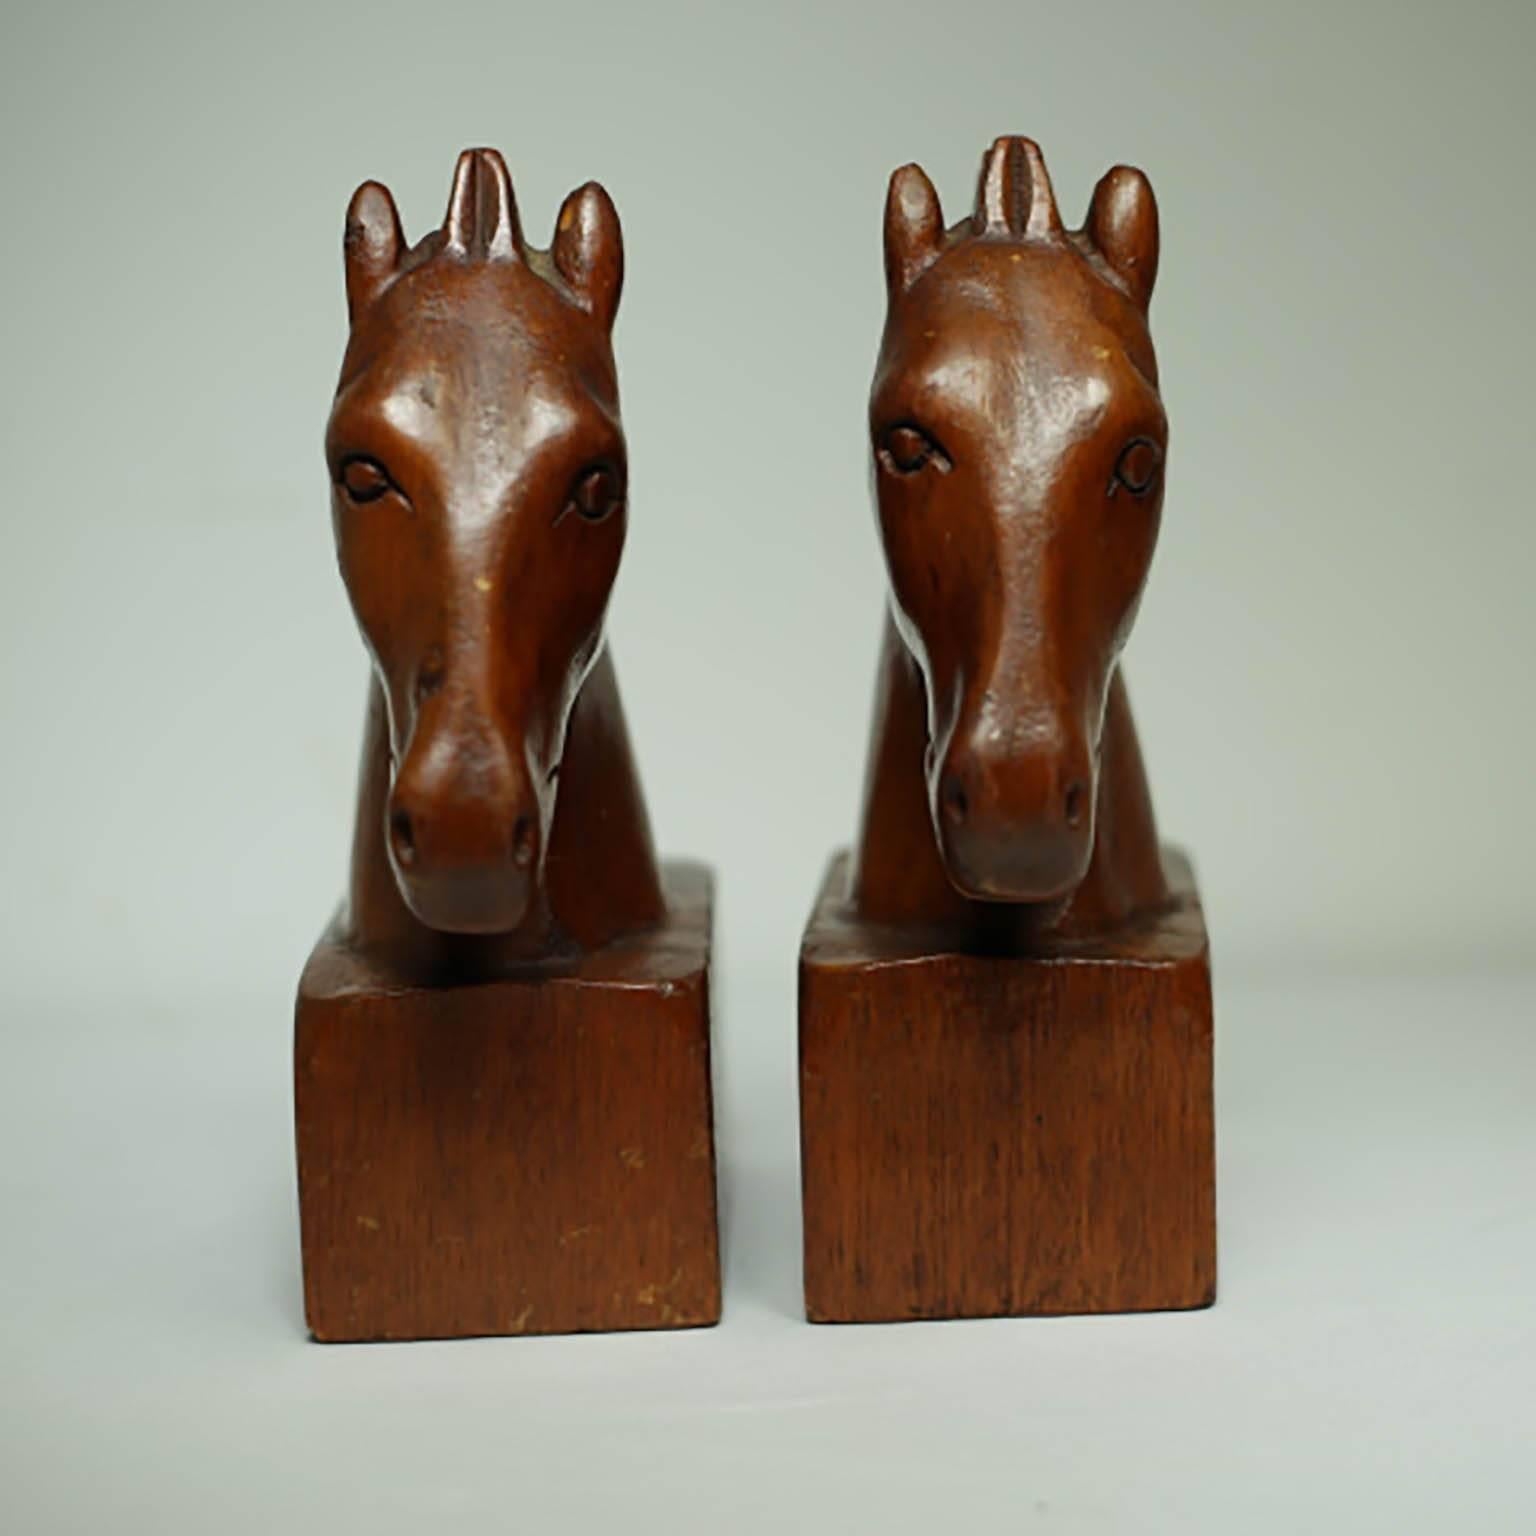 ABOUT
This is an original pair Trojan horse bookends. The bookends are carved wood with a reddish brown varnish. The use of wood and the overall look of the bookends is very in keeping with the style of the early 1950s. Both pieces have retained